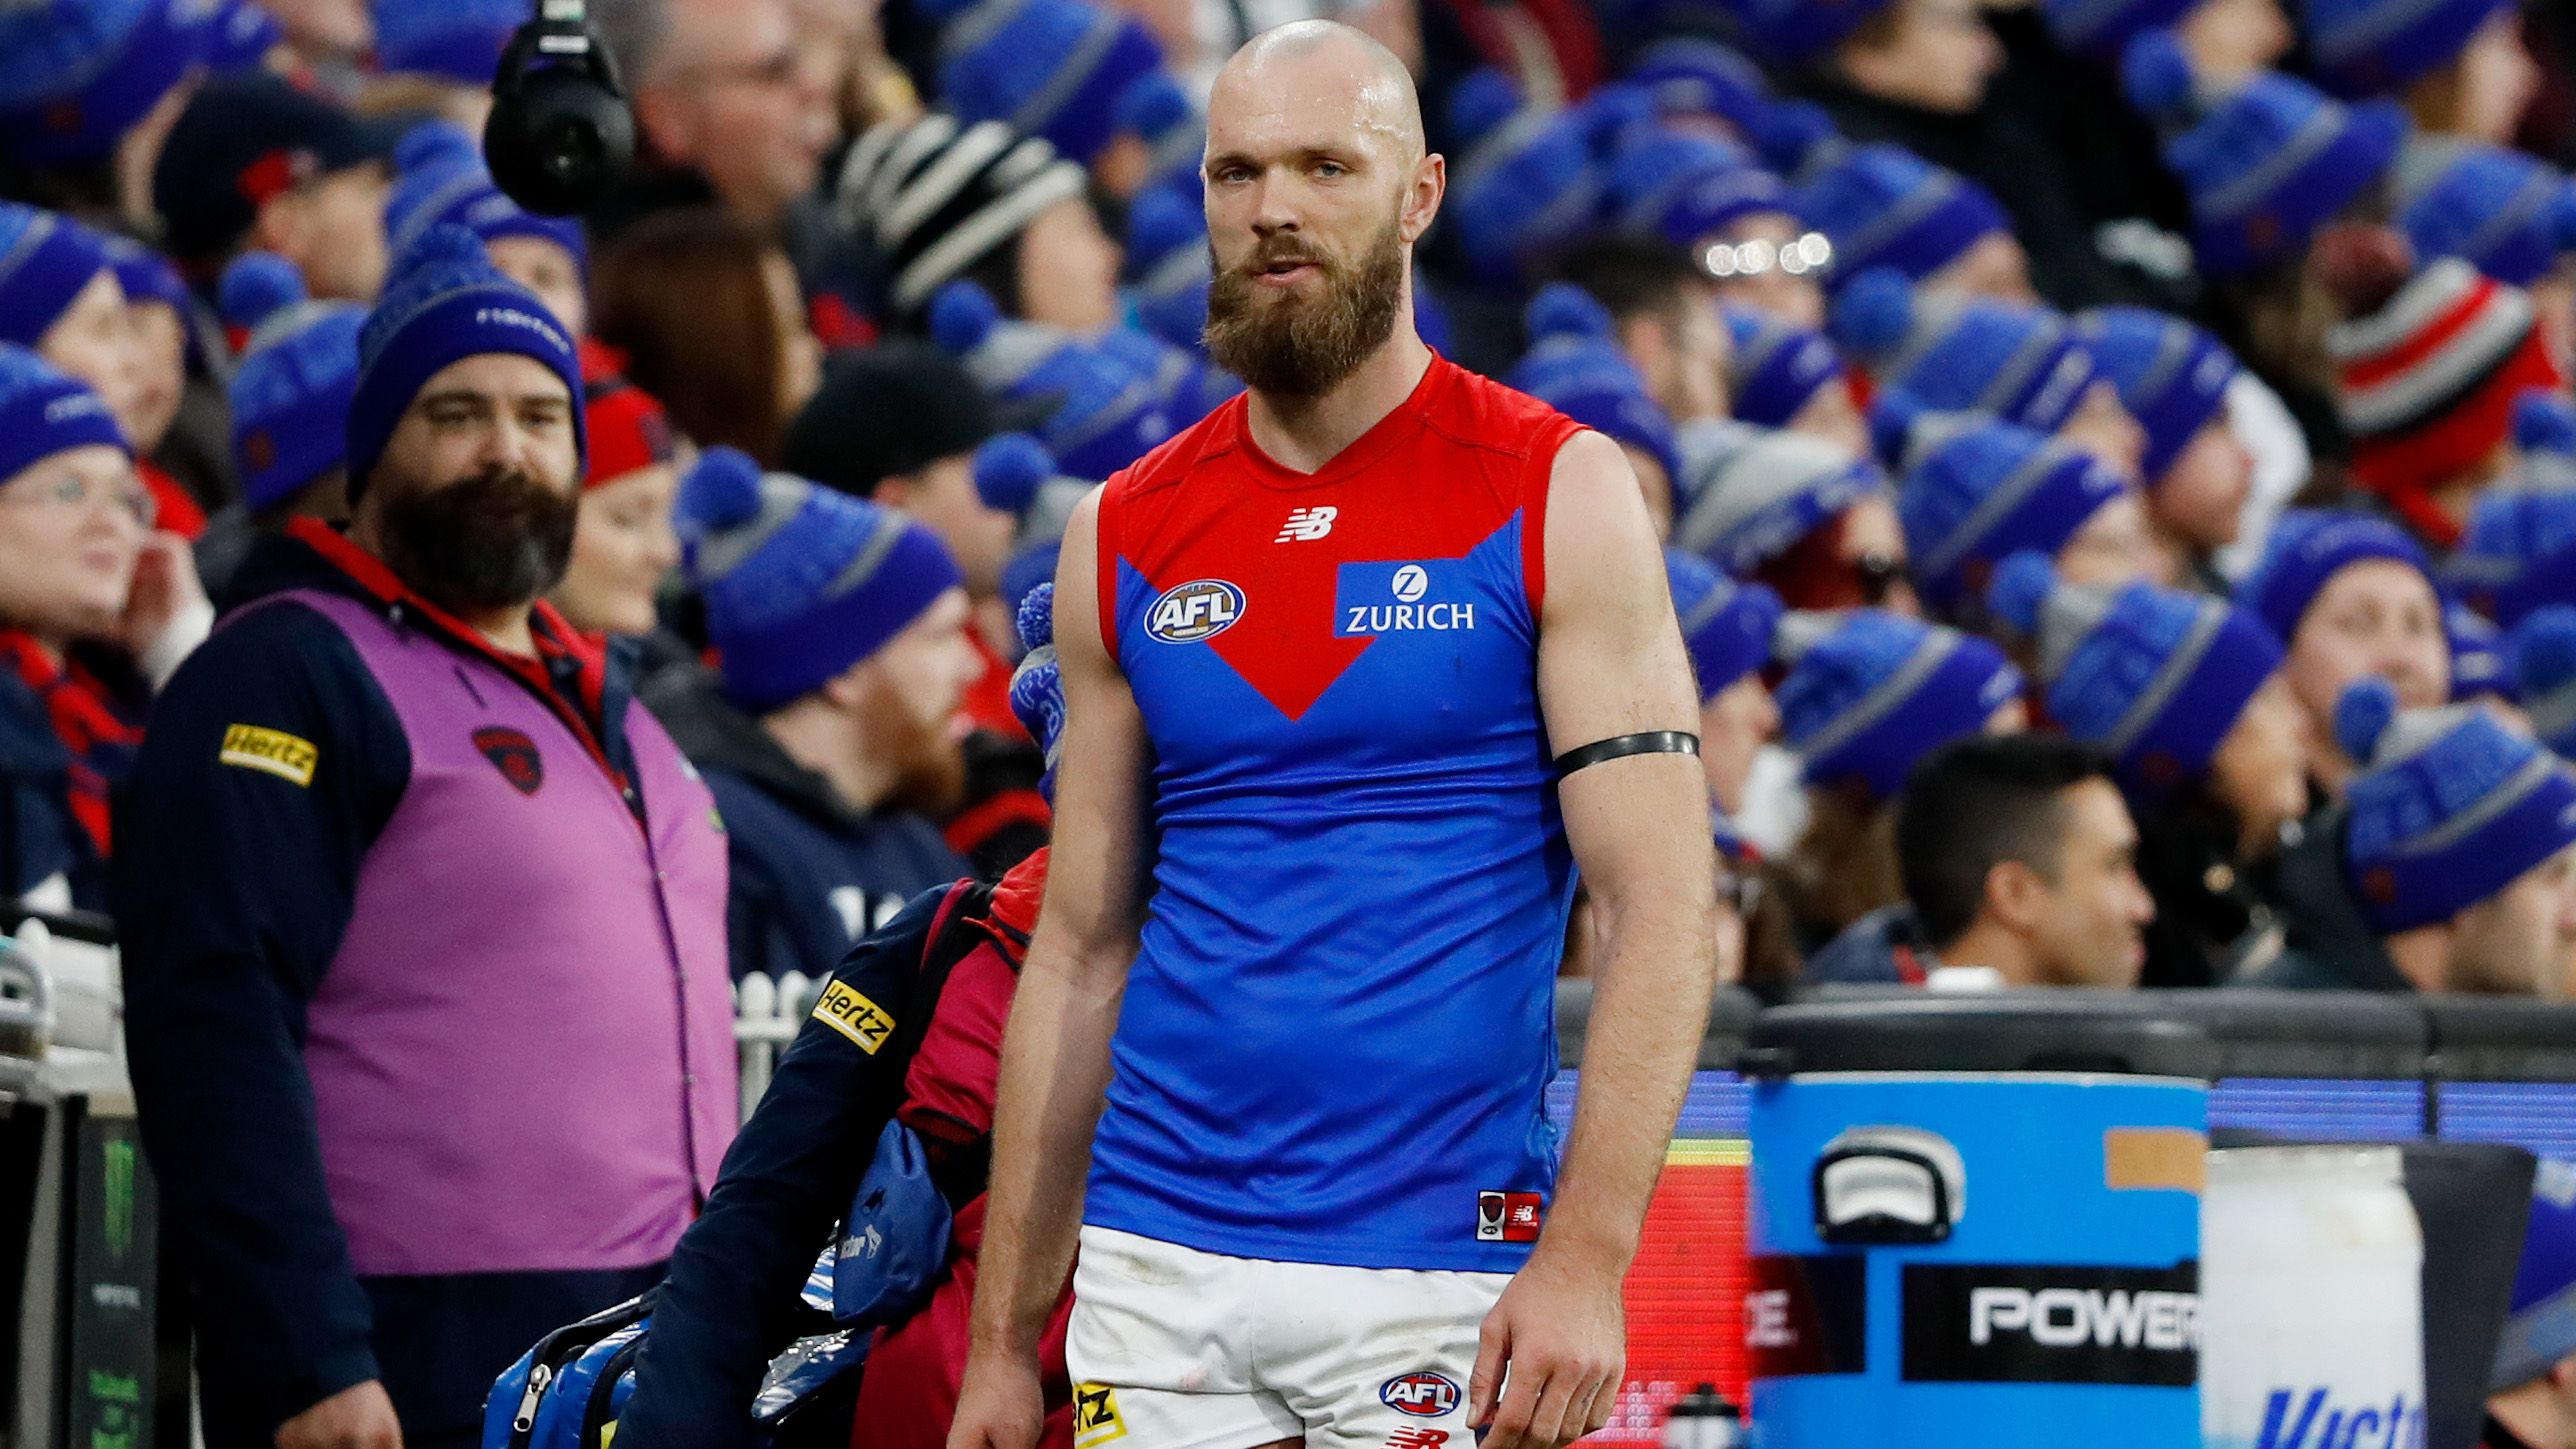 Demons skipper Max Gawn sidelined with ankle injury  